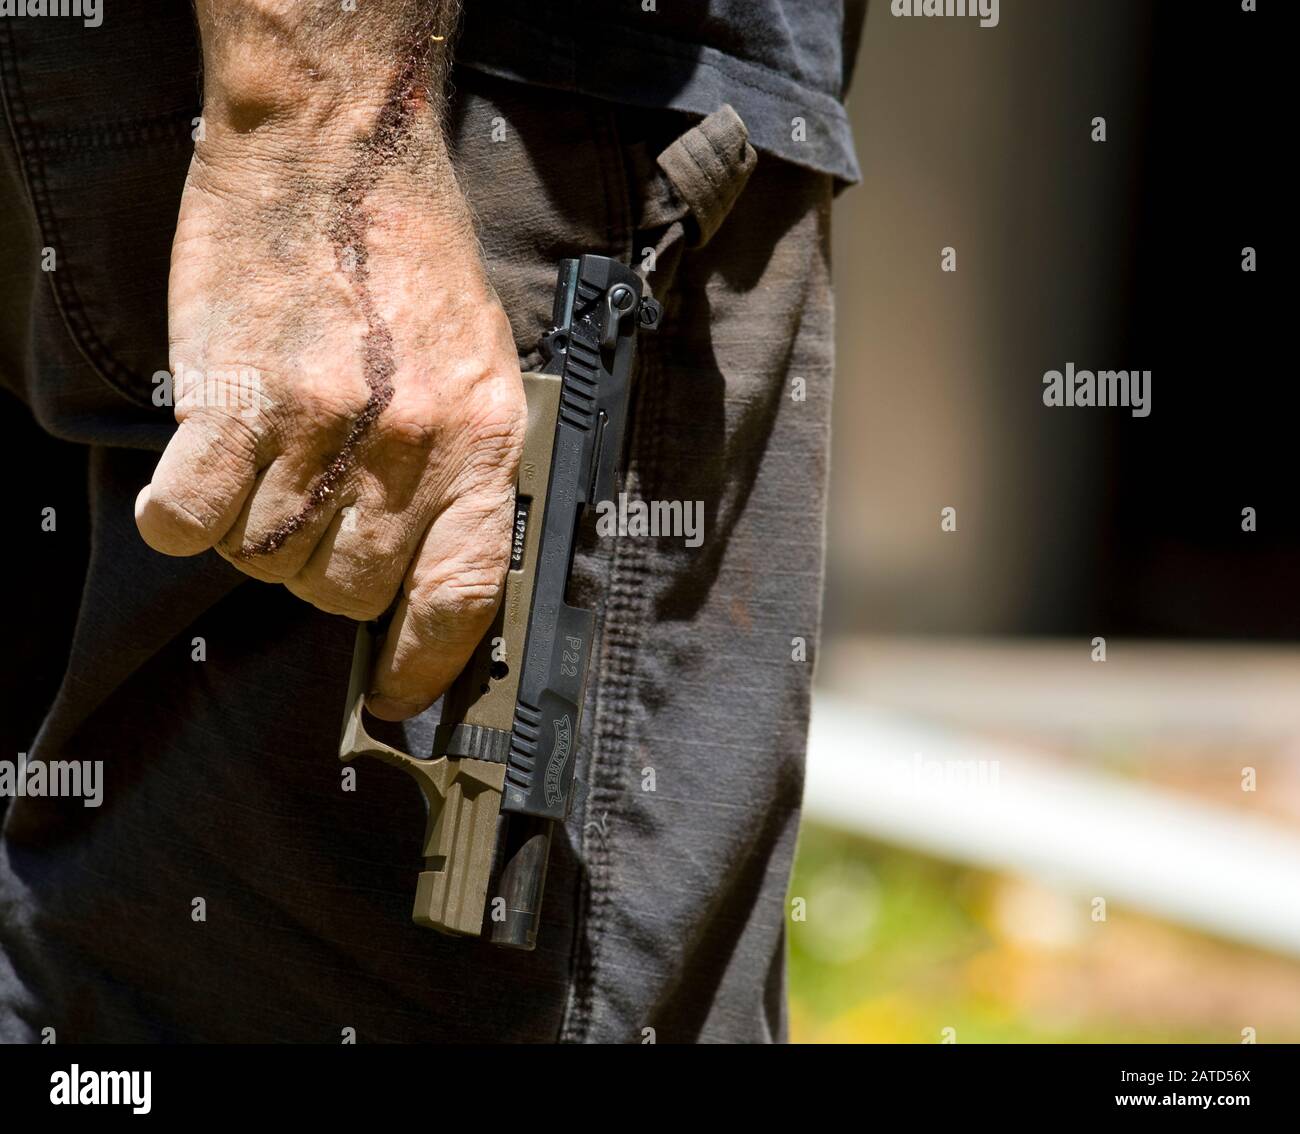 Man with dried blood on his hand and arm wearing tactical pants a holding Walther P22 automatic pistol. Stock Photo